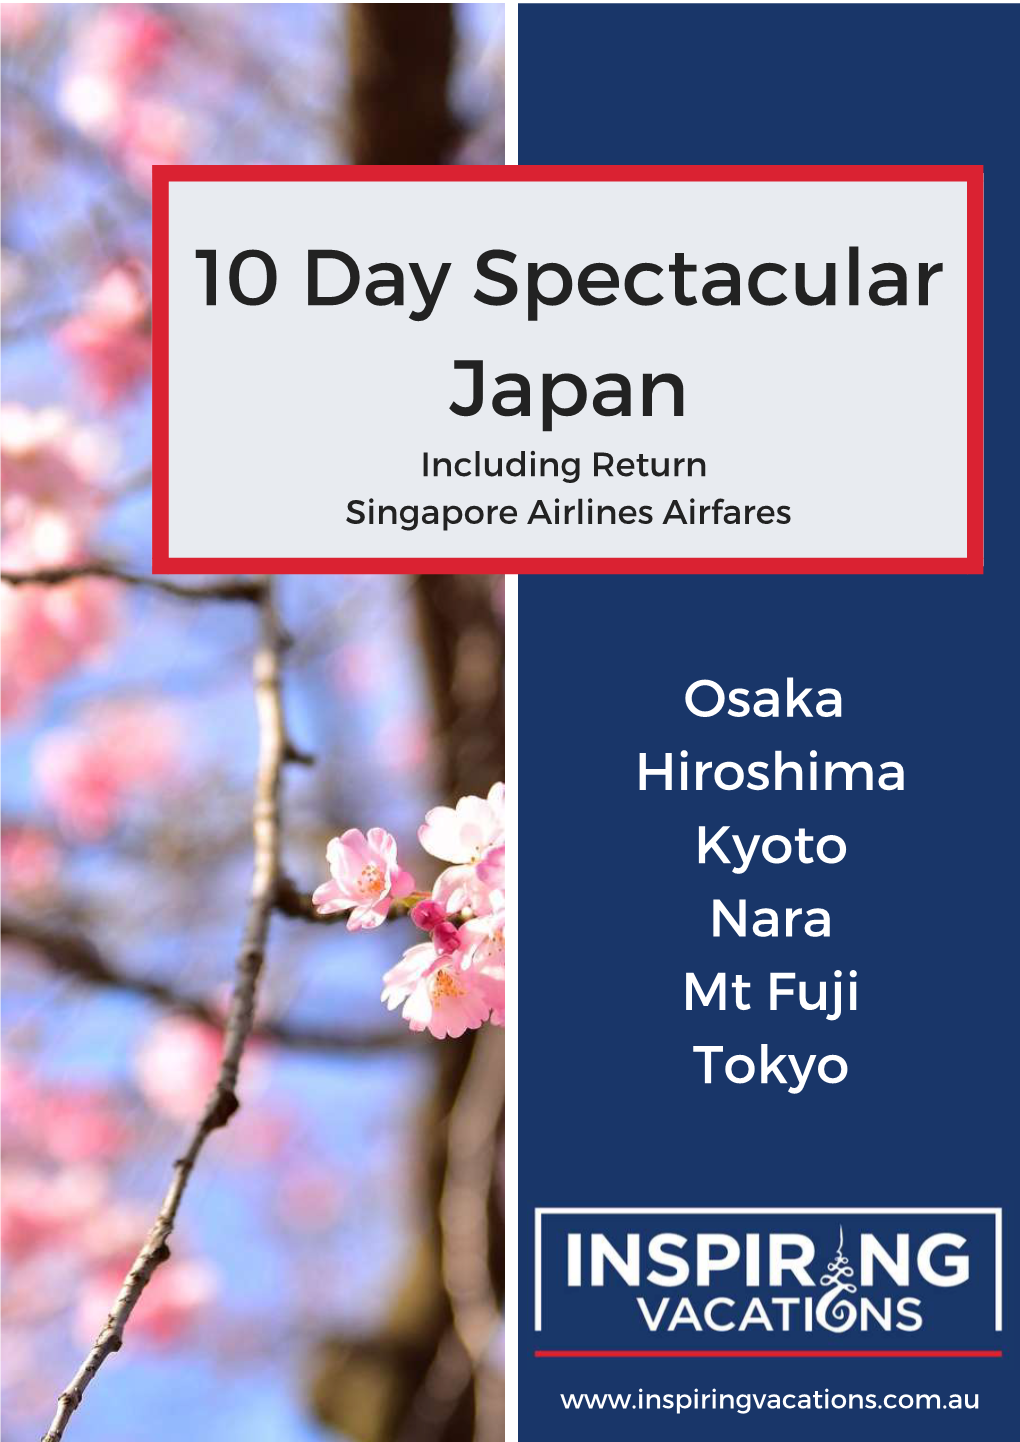 10 Day Spectacular Japan Including Return Singapore Airlines Airfares